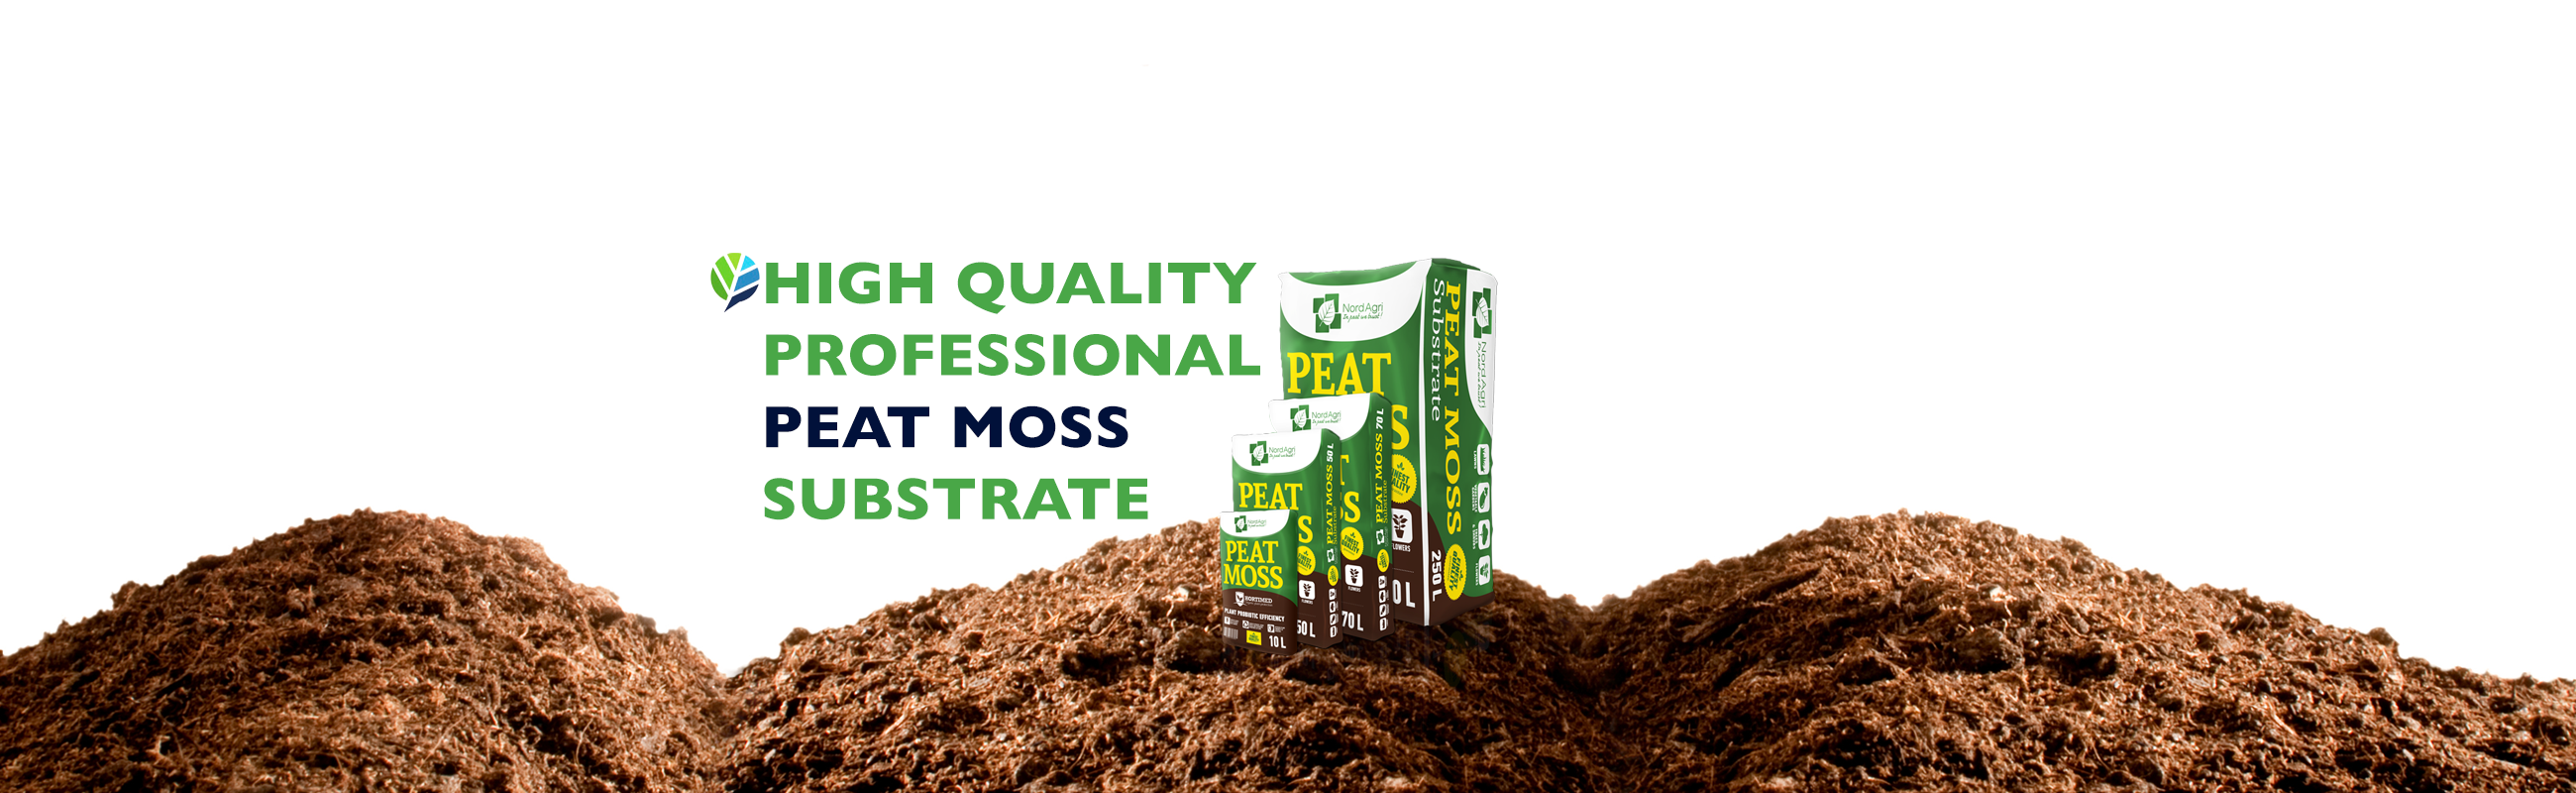 Professional Peat moss substrate